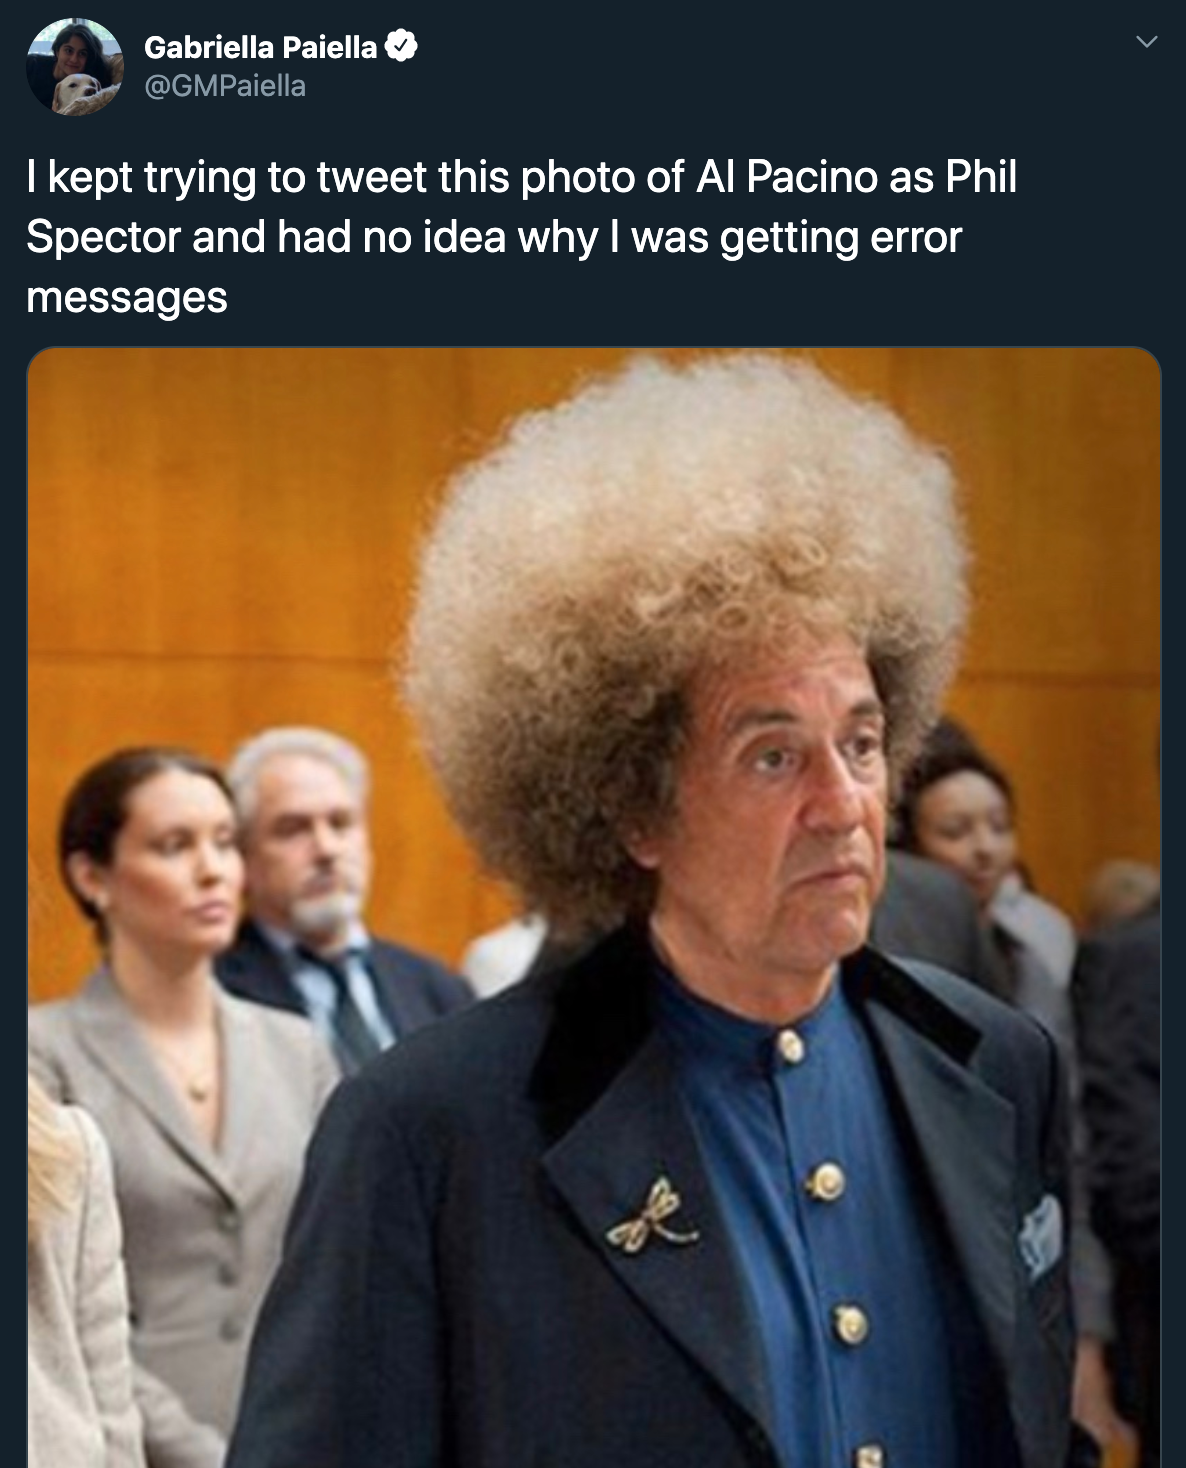 I kept trying to tweet this photo of Al Pacino as Phil Spector and had no idea why I was getting error messages